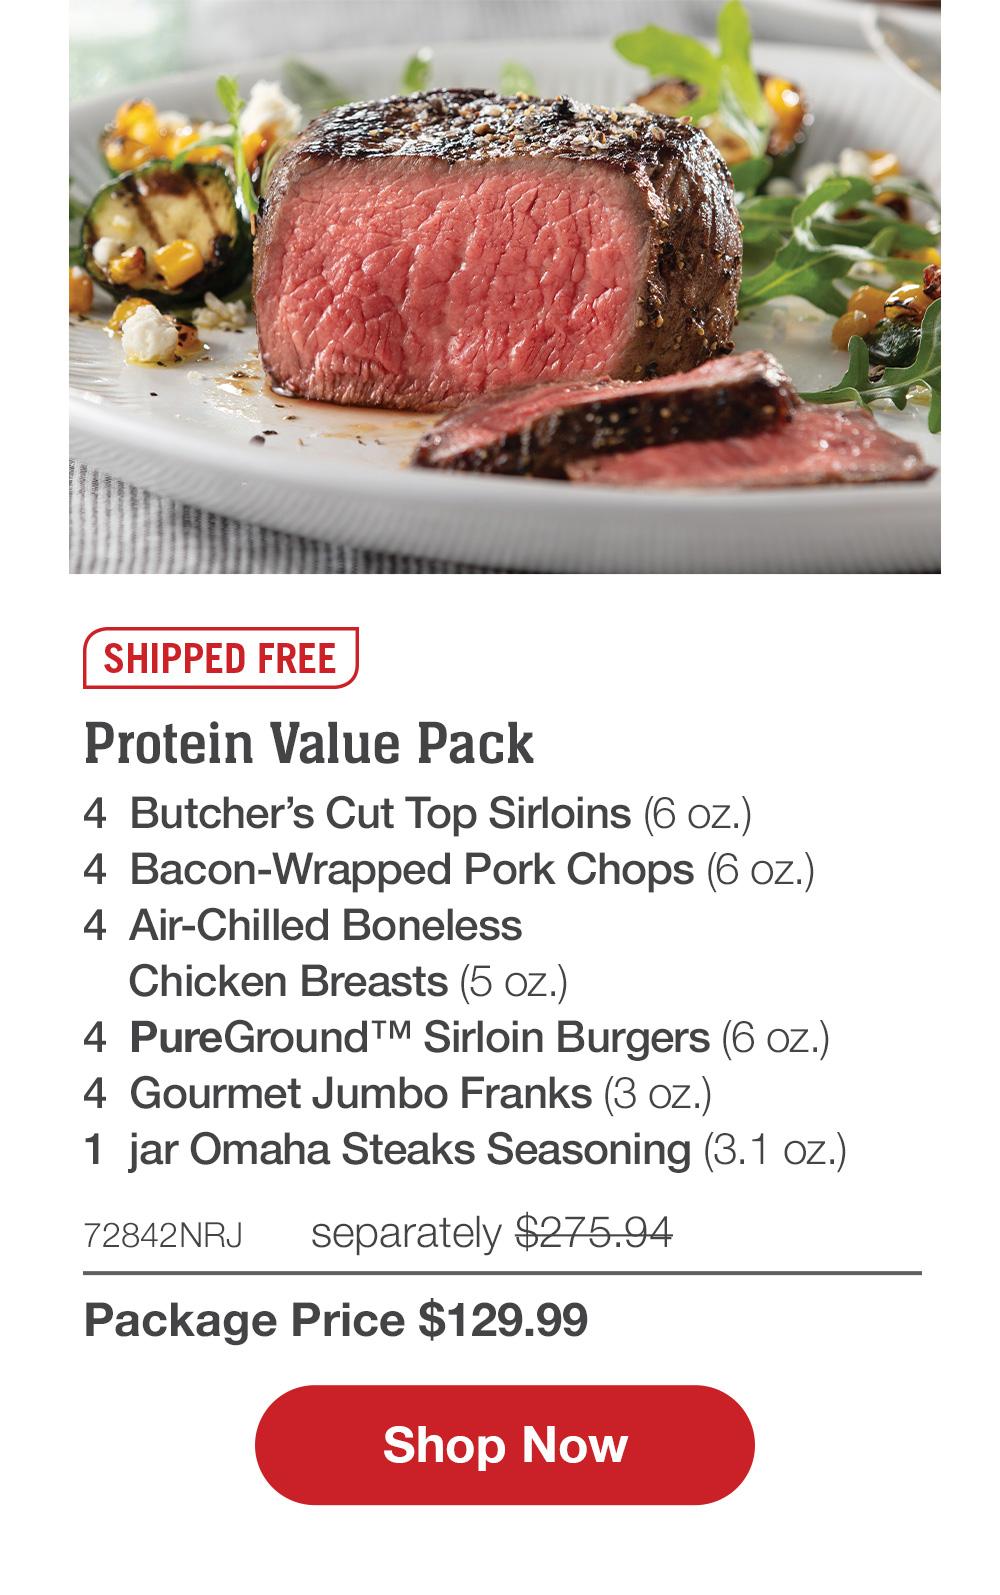 SHIPPED FREE | Protein Value Pack - 4  Butcher's Cut Top Sirloins (6 oz.) - 4  Bacon-Wrapped Pork Chops (6 oz.) - 4  Air-Chilled Boneless Chicken Breasts (5 oz.) - 4  PureGround™ Sirloin Burgers (6 oz.) - 4  Gourmet Jumbo Franks (3 oz.) - 1  jar Omaha Steaks Seasoning (3.1 oz.) - 72842NRJ separately $275.94 Package Price $129.99 || SHOP NOW